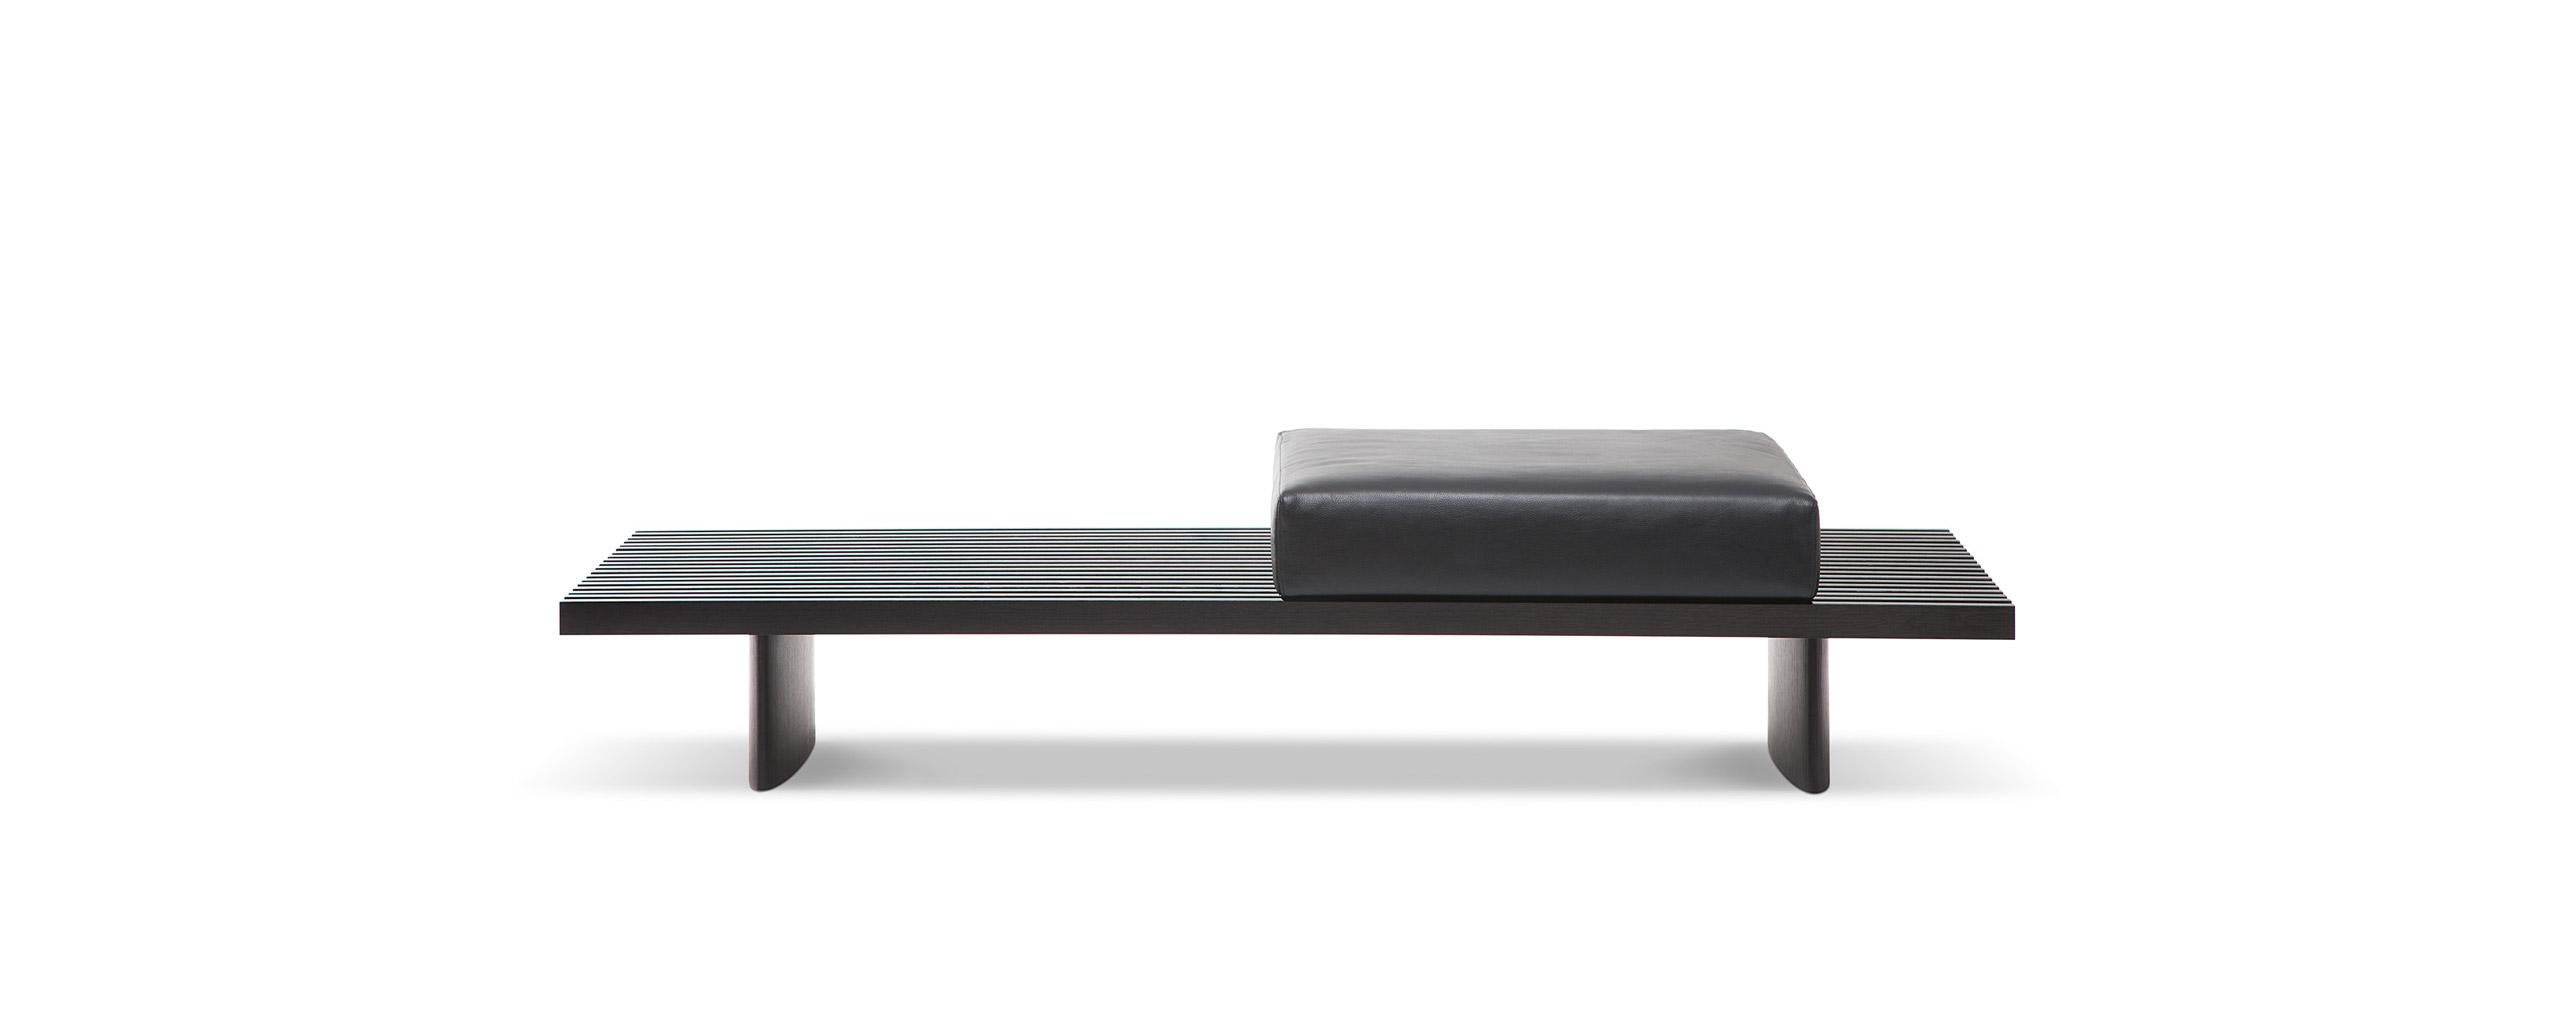 Wood Charlotte Perriand Refolo Low Table by Cassina